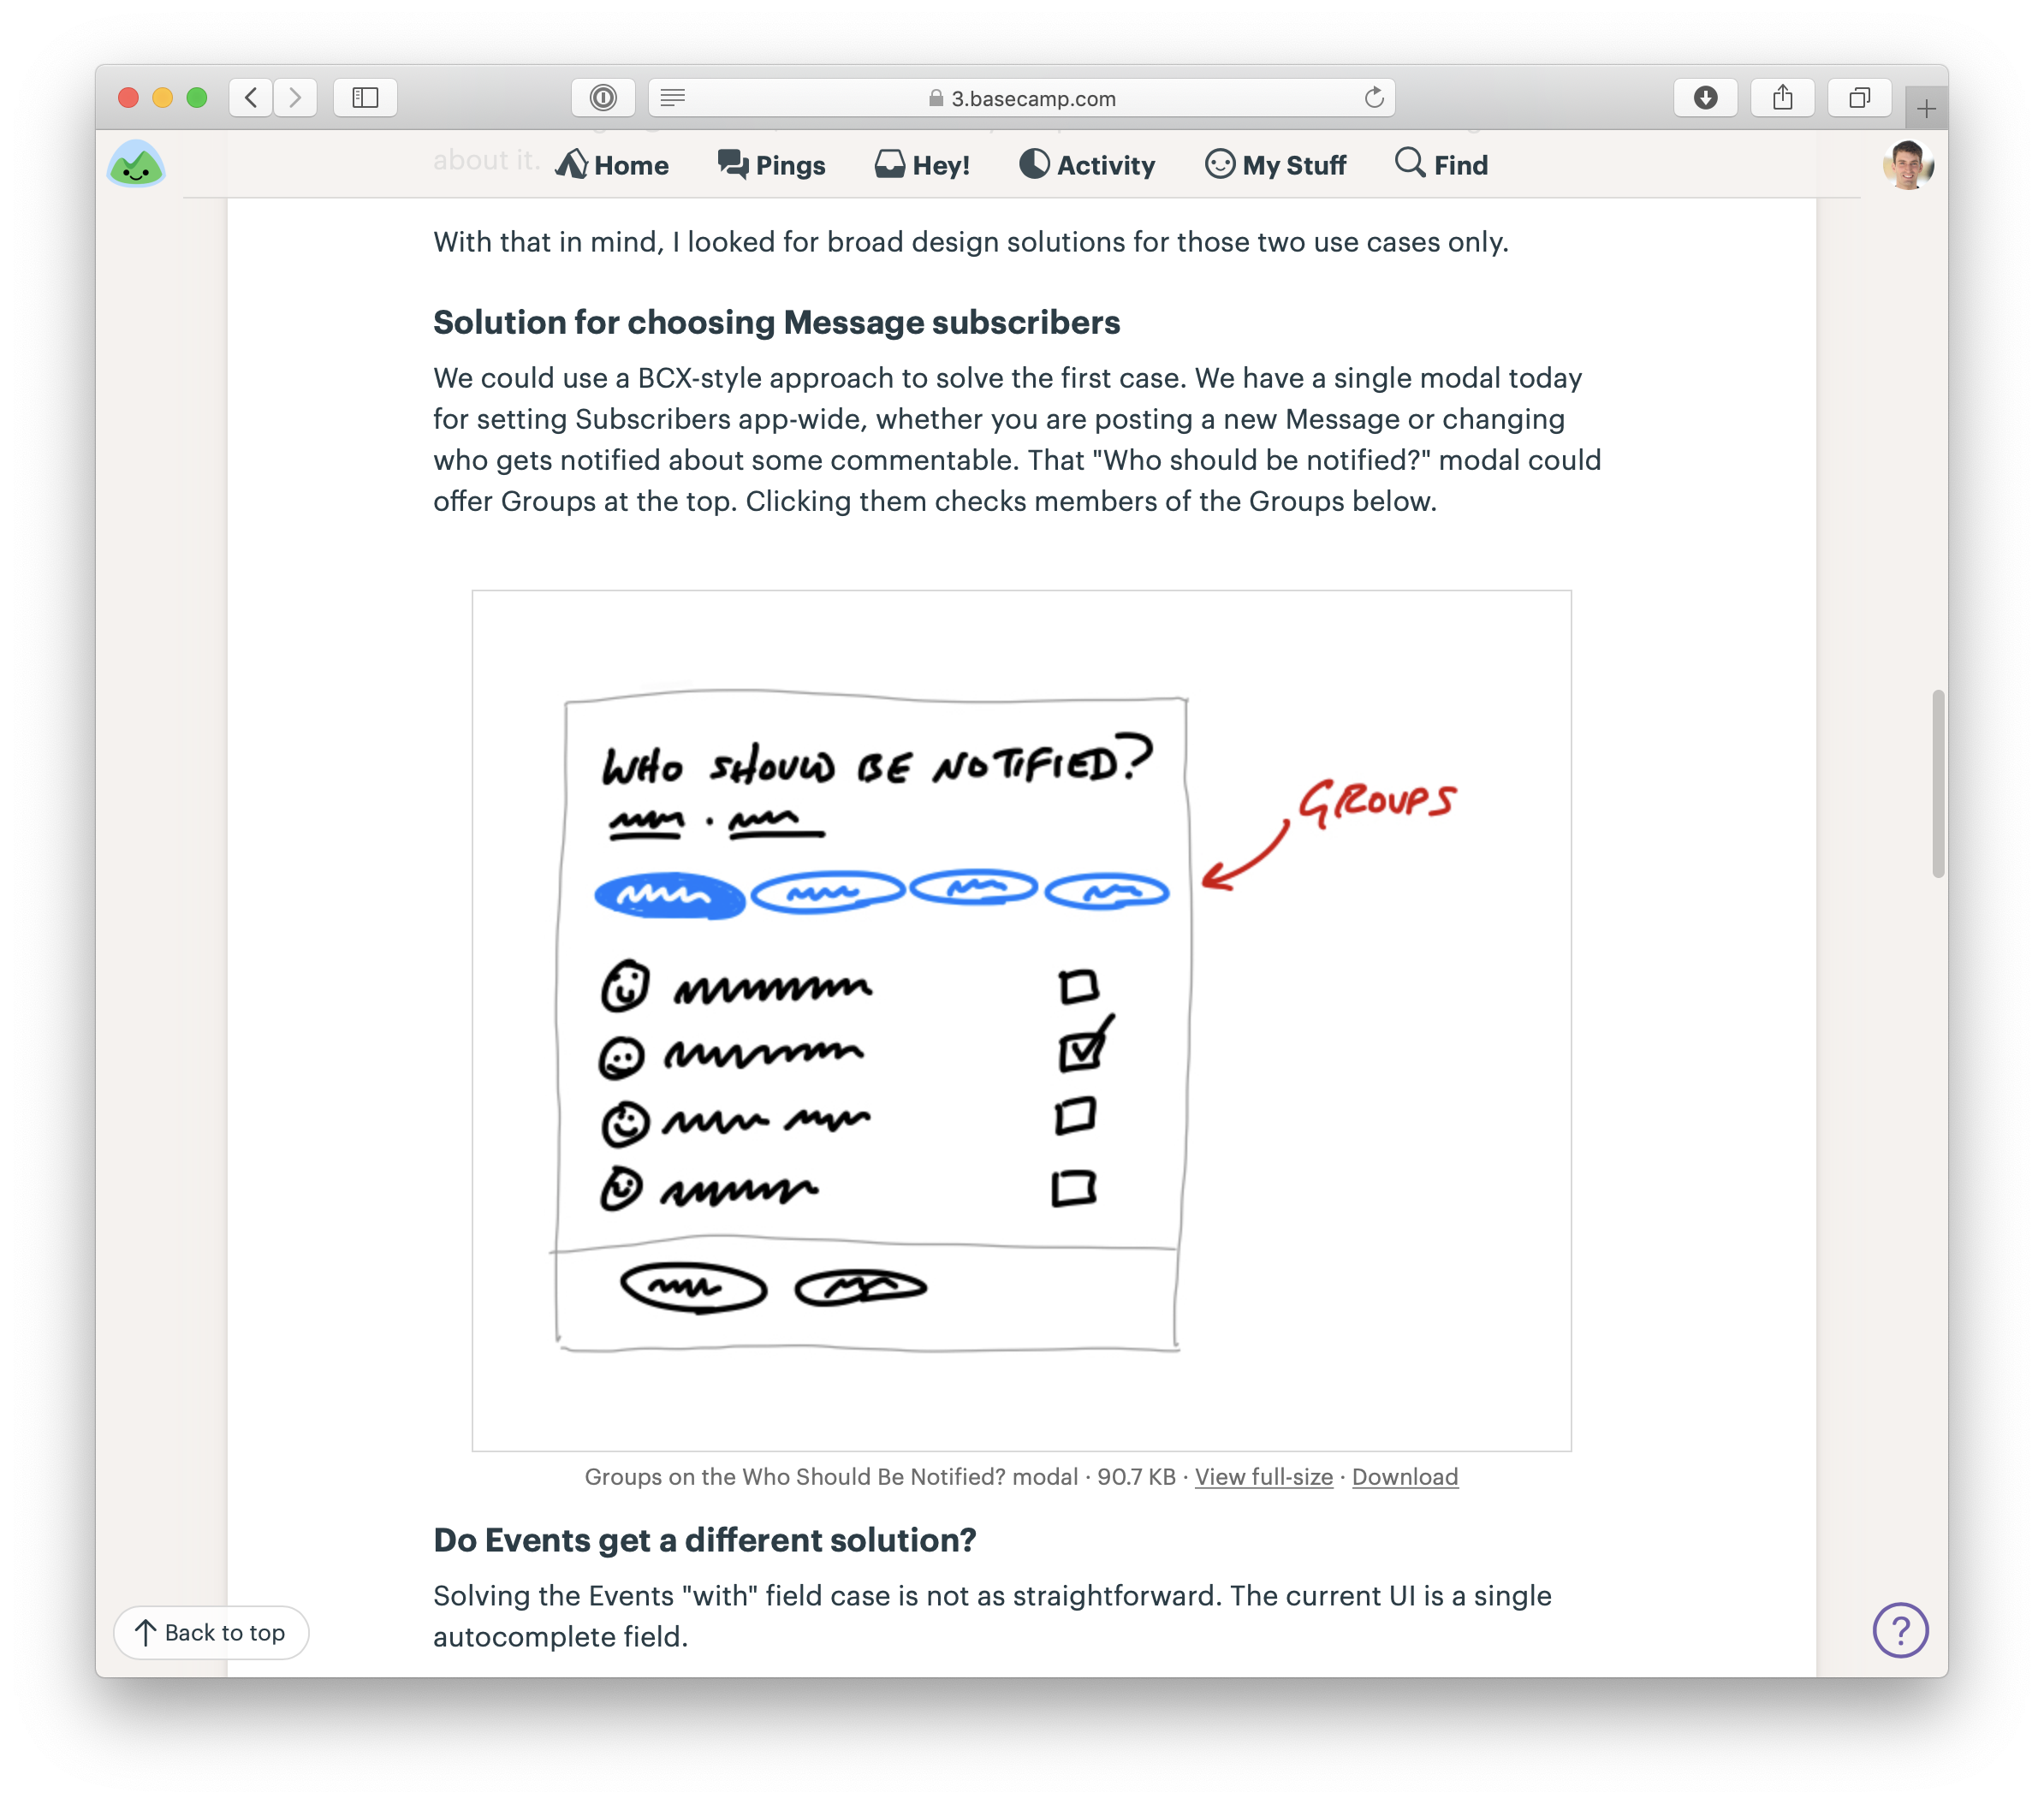 Screenshot of another Pitch in Basecamp. The part of the pitch that is scrolled into view has a fat marker sketch embedded in the middle.